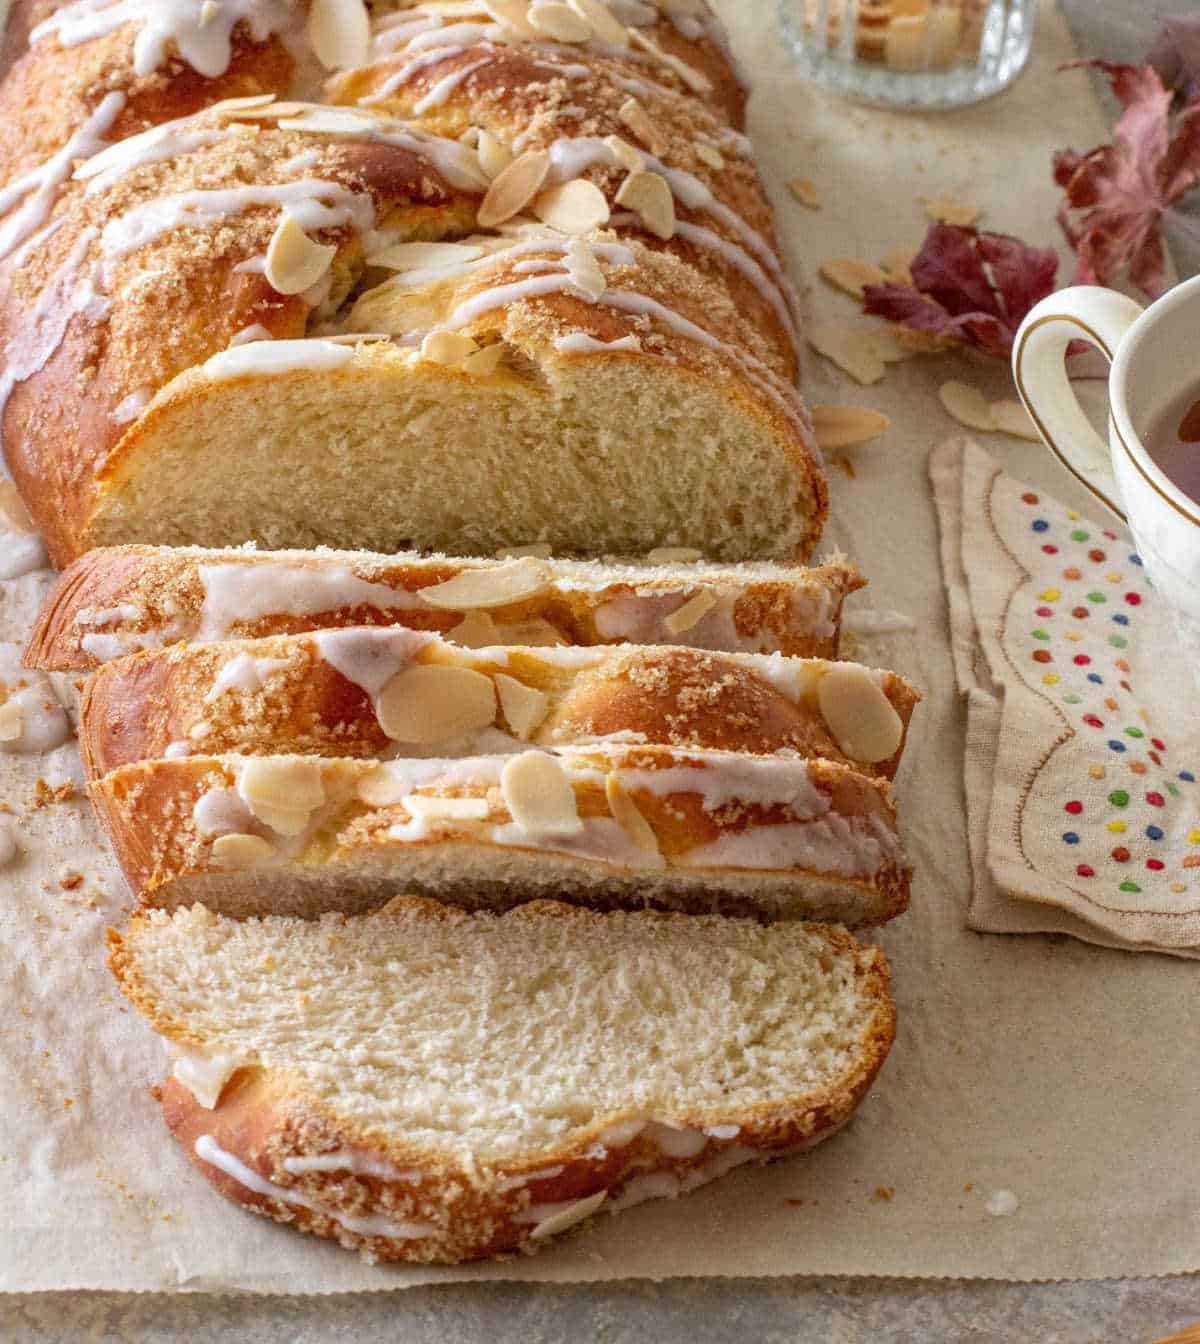 Slices of Glazed Braided Easter Bread